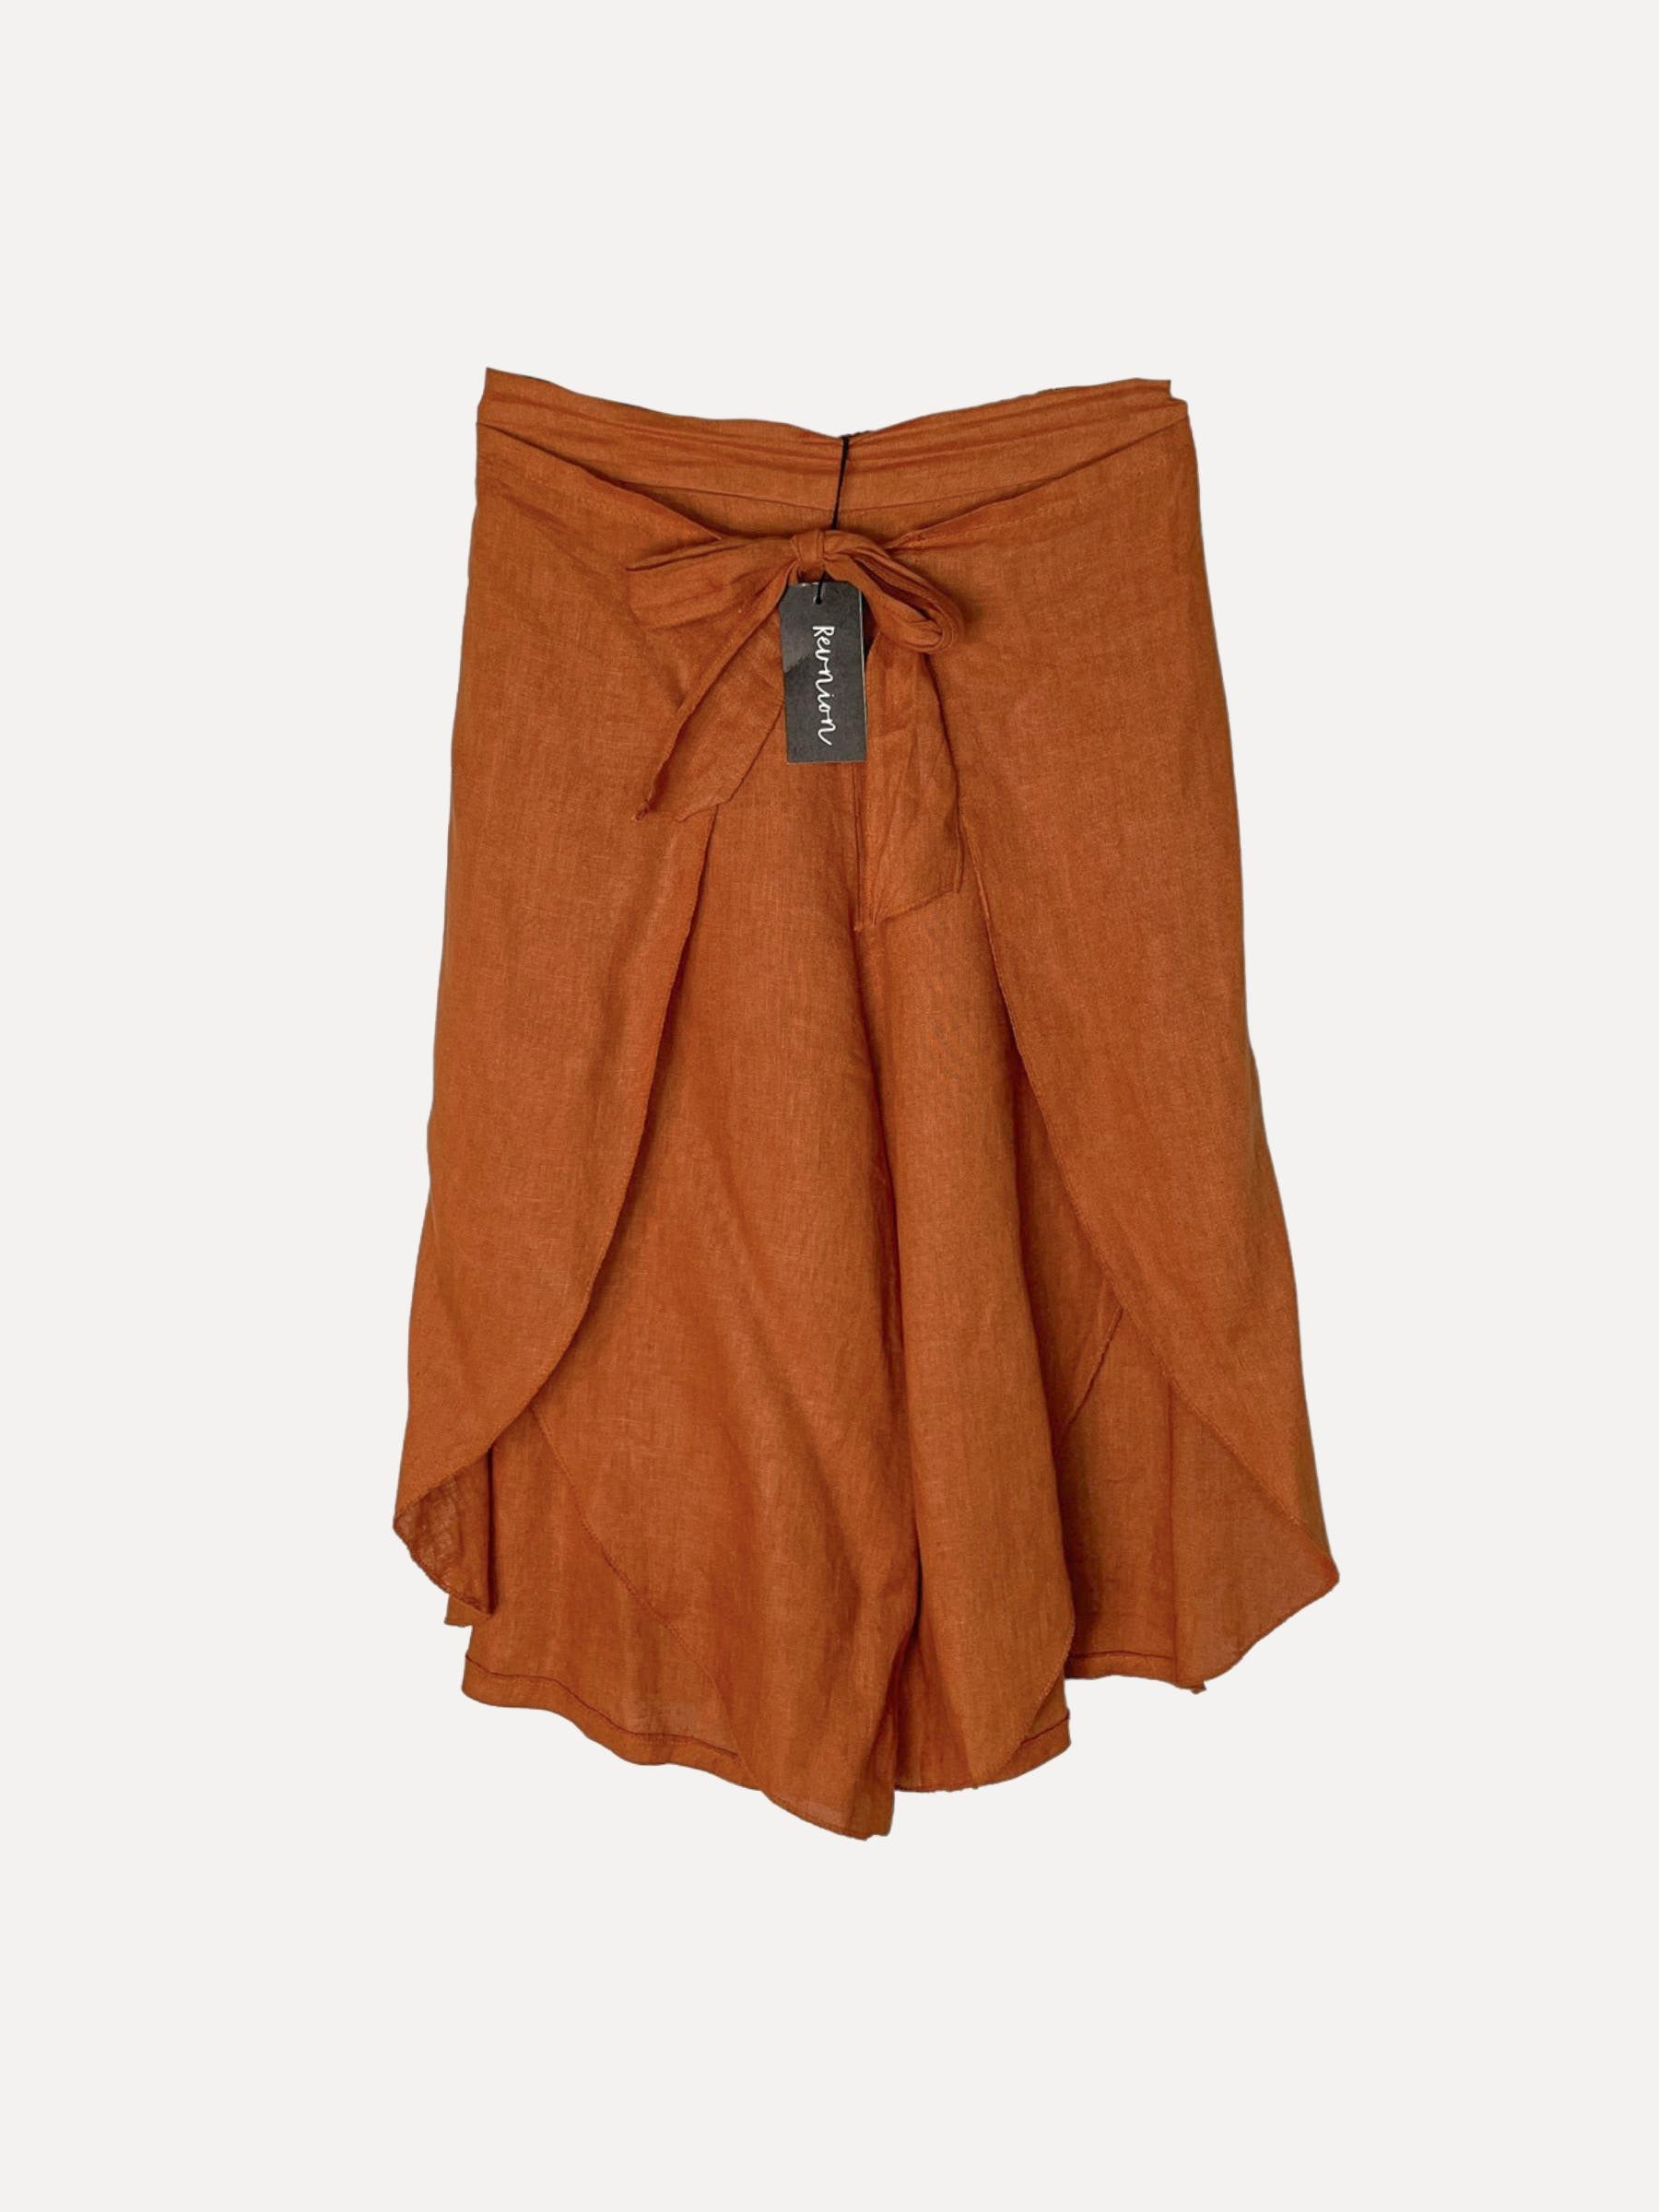 ORCHID Shorts, Sepia Brown